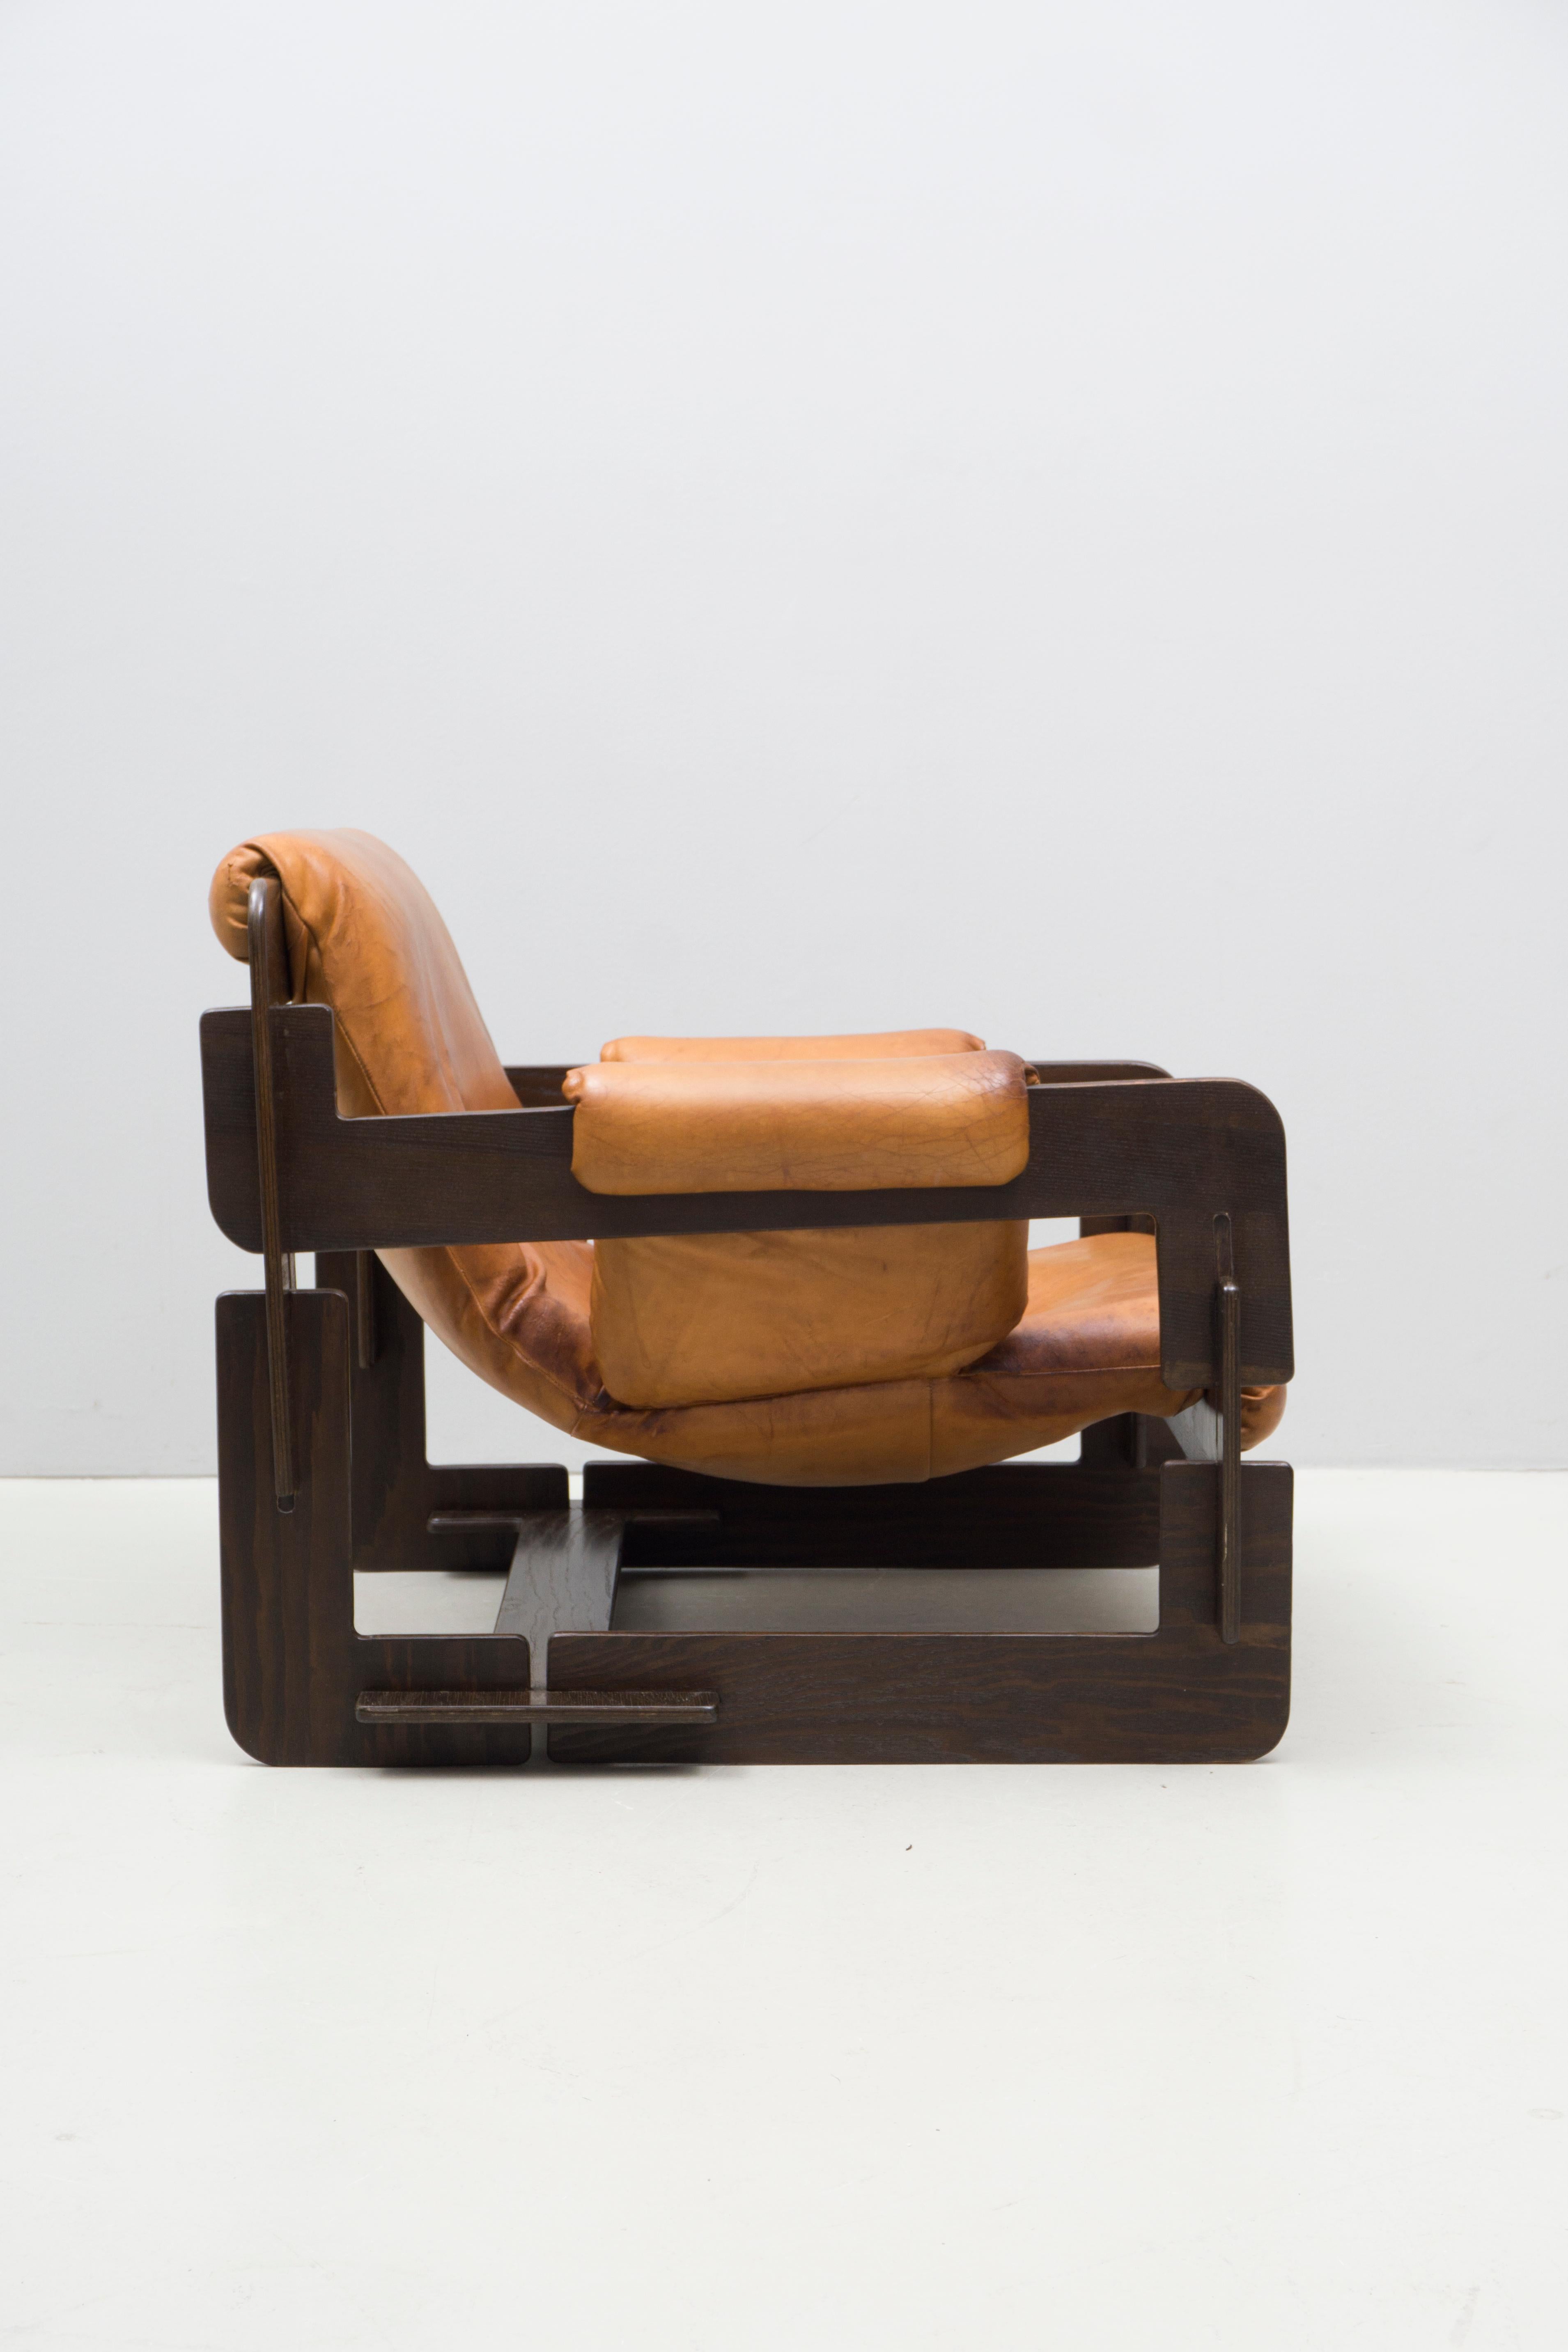 Mid-20th Century Armchair Designed by Arne Jacobsen 1966 For Sale